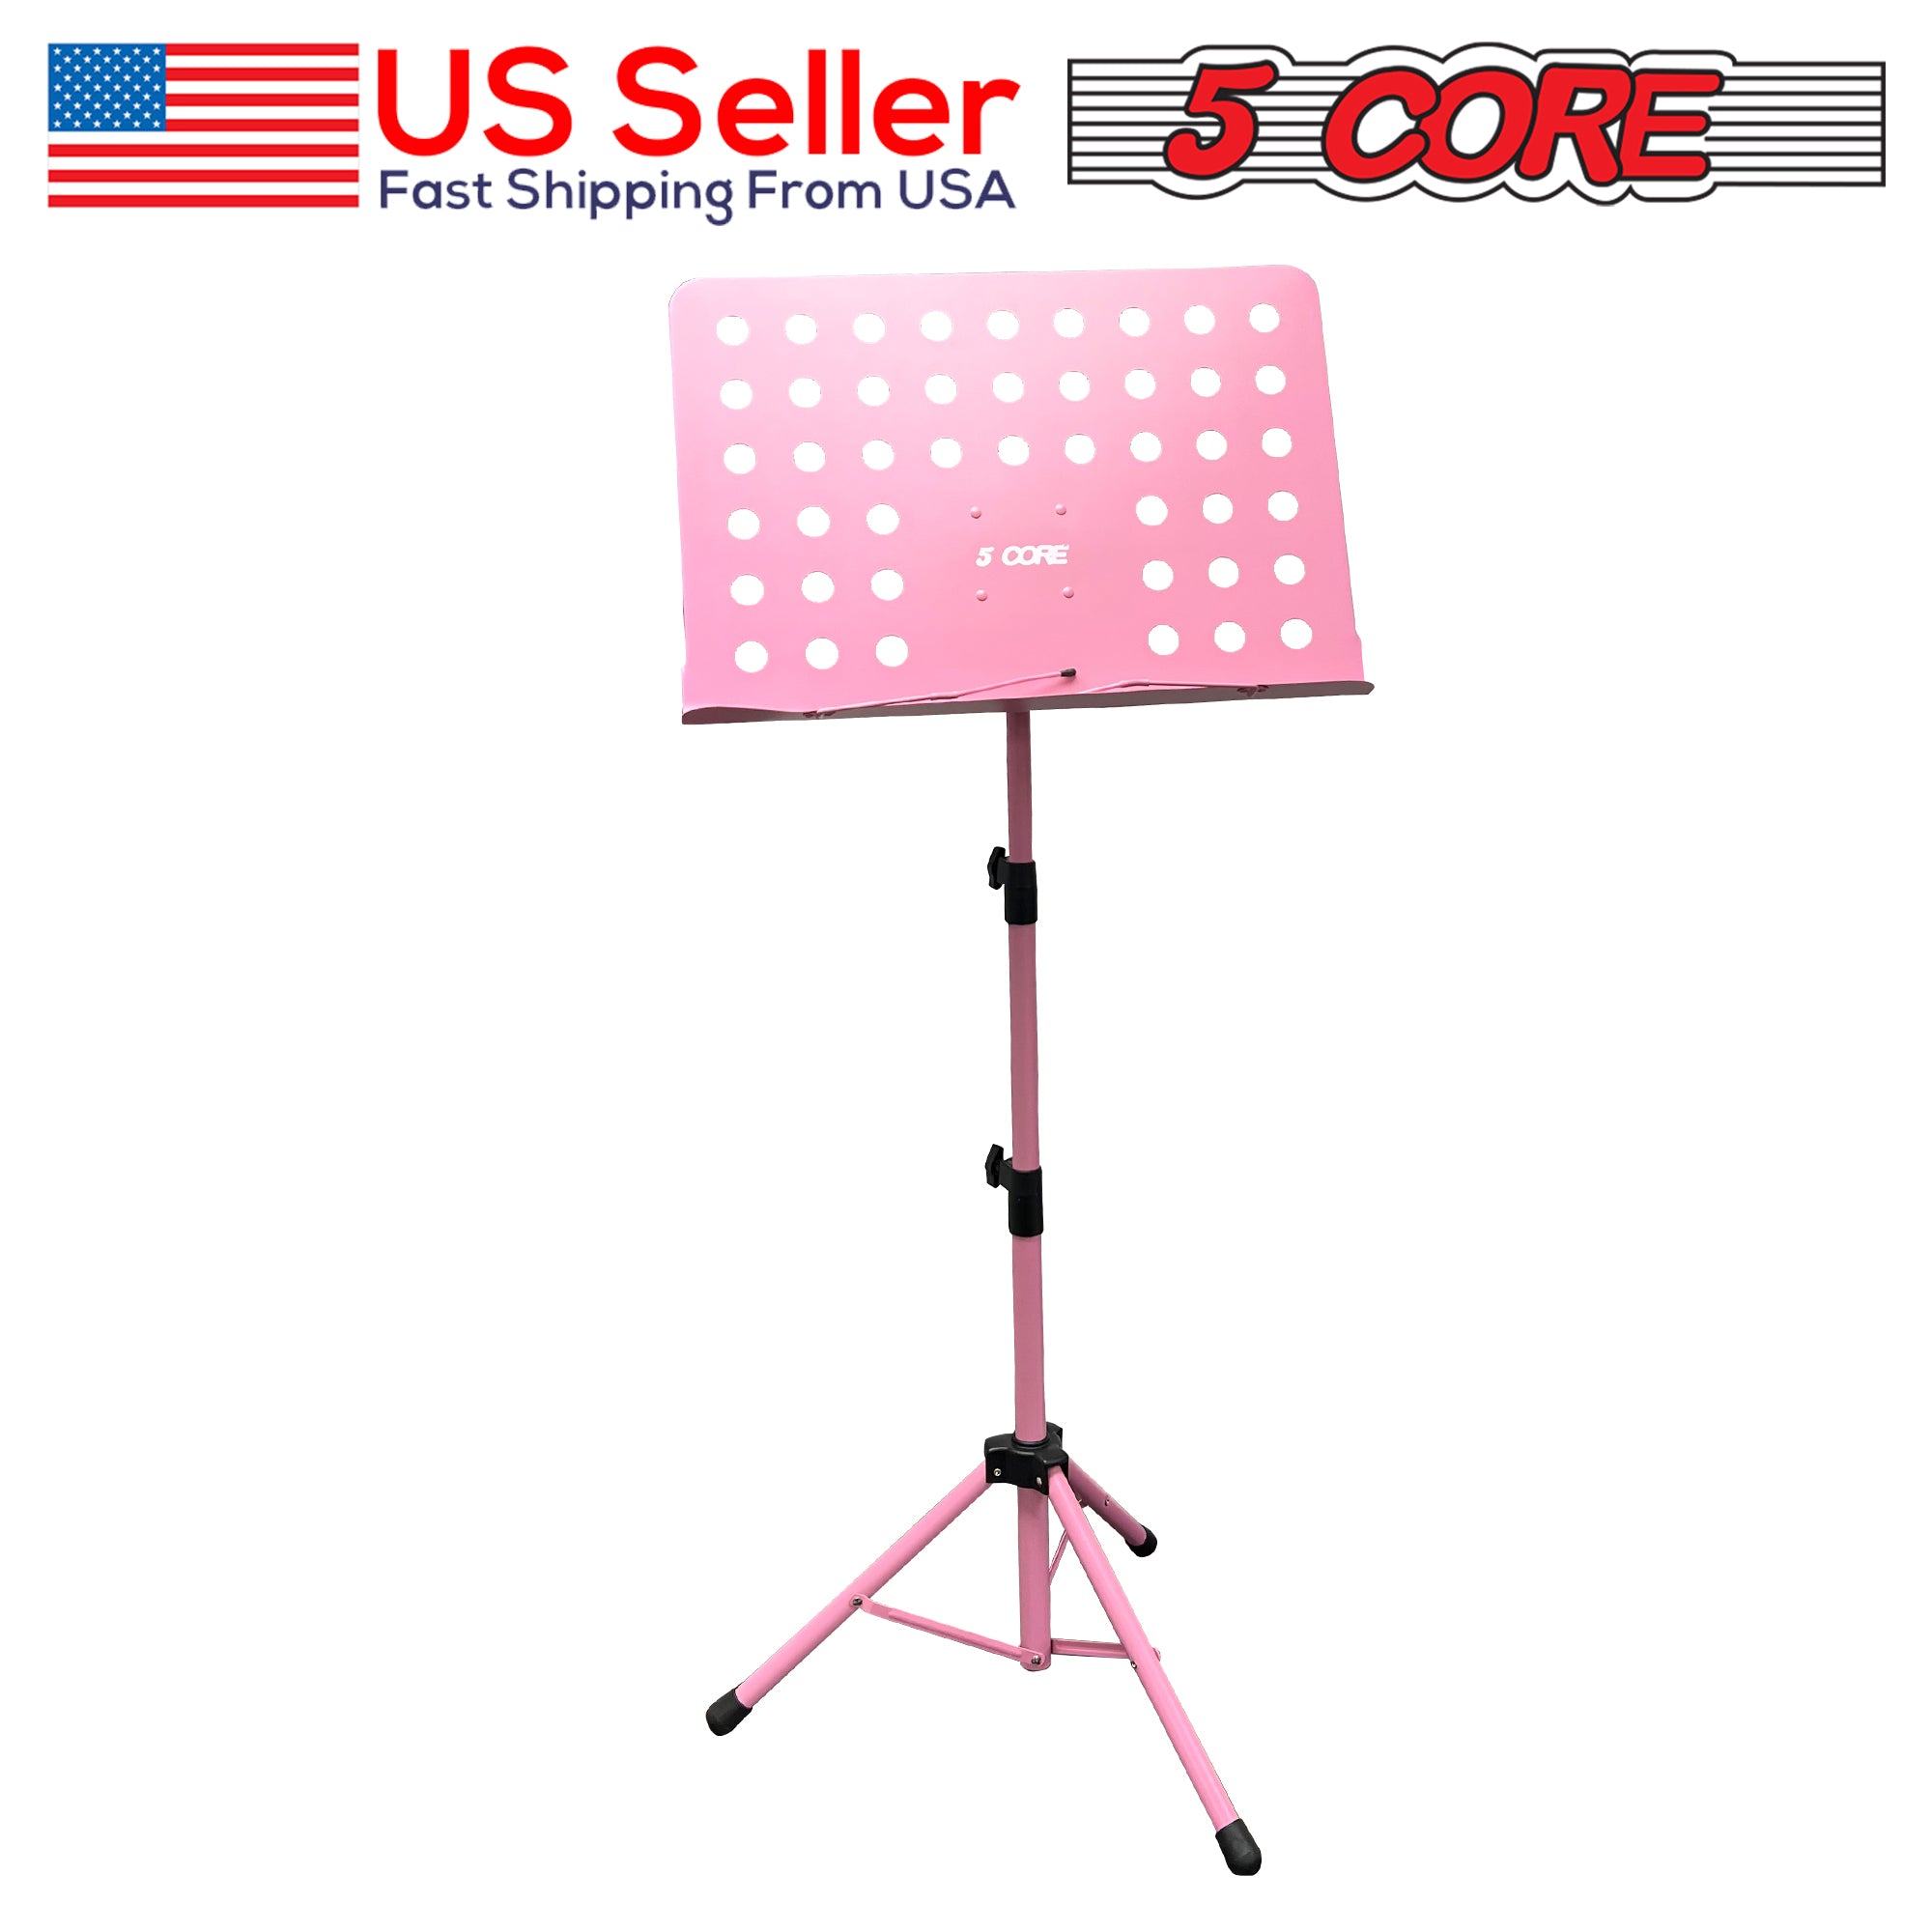 5 Core Sheet Music Stand Pink • Sturdy Portable Height Adjustable Music Note Holder Tripod Stands